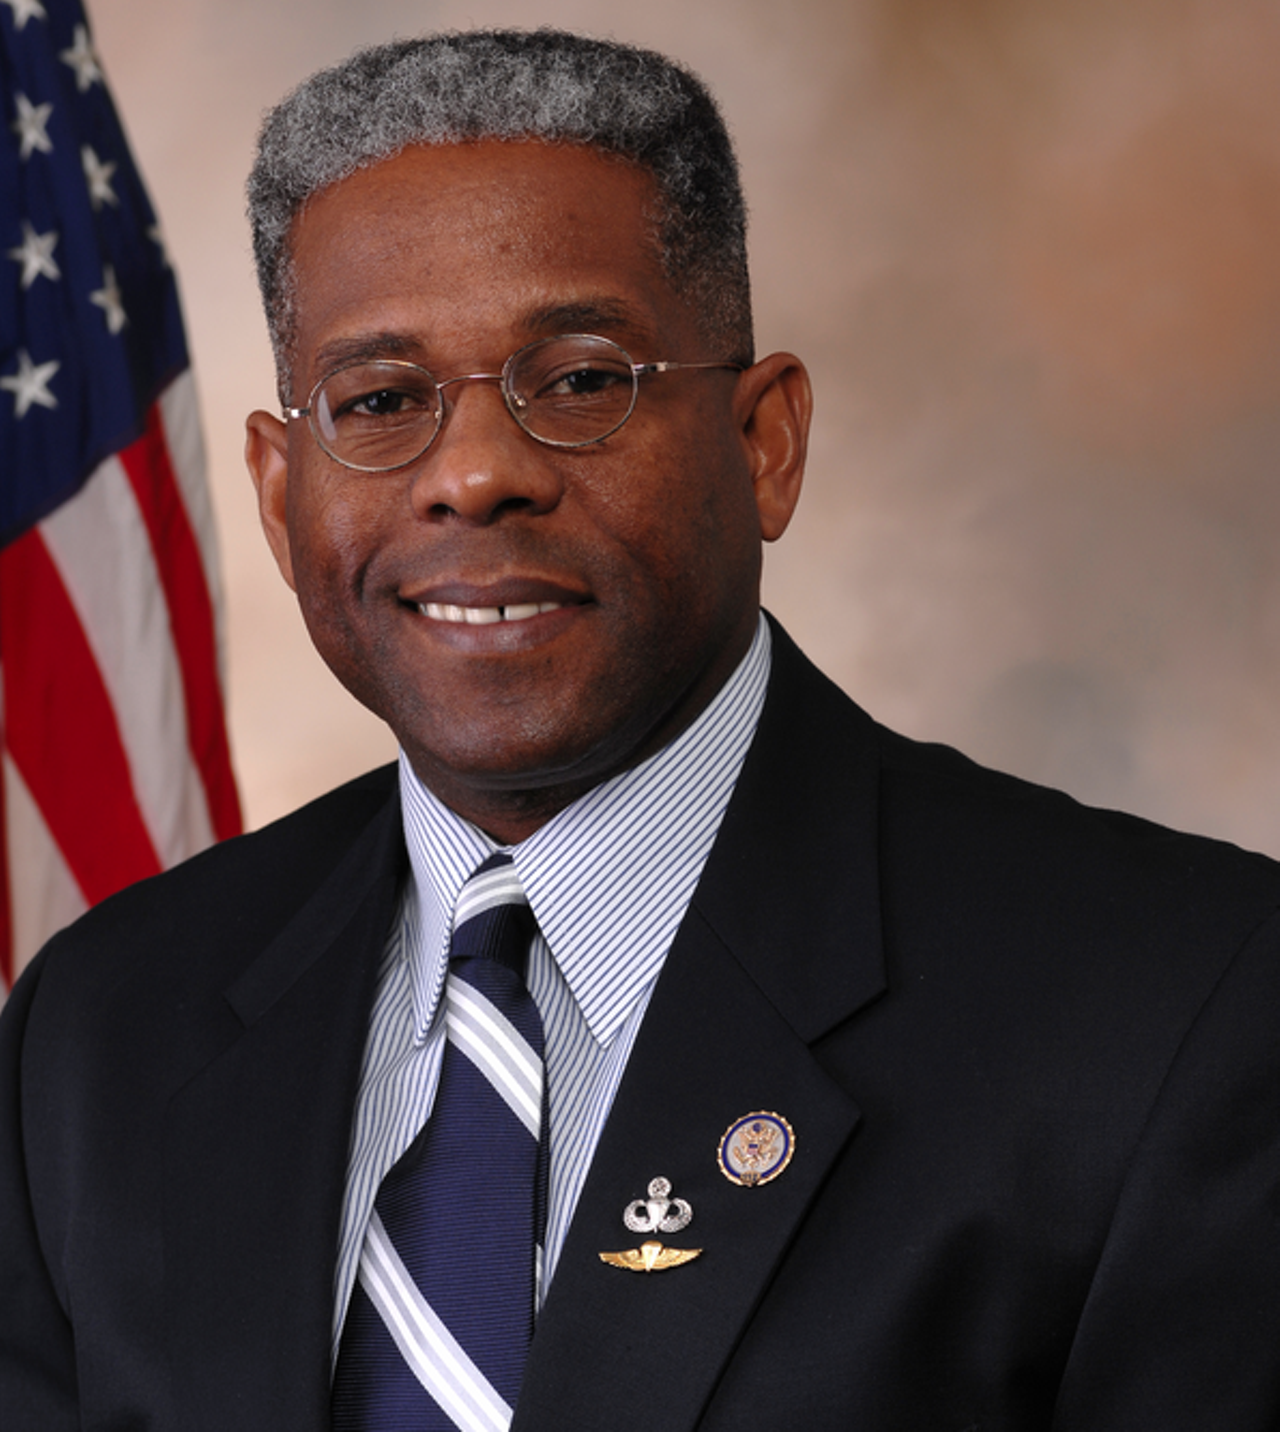 Allen West
"Abraham Lincoln only served one term in Congress," West said this year after losing his congressional seat, marking the last time anyone will ever compare the Tea Party favorite to President Lincoln.